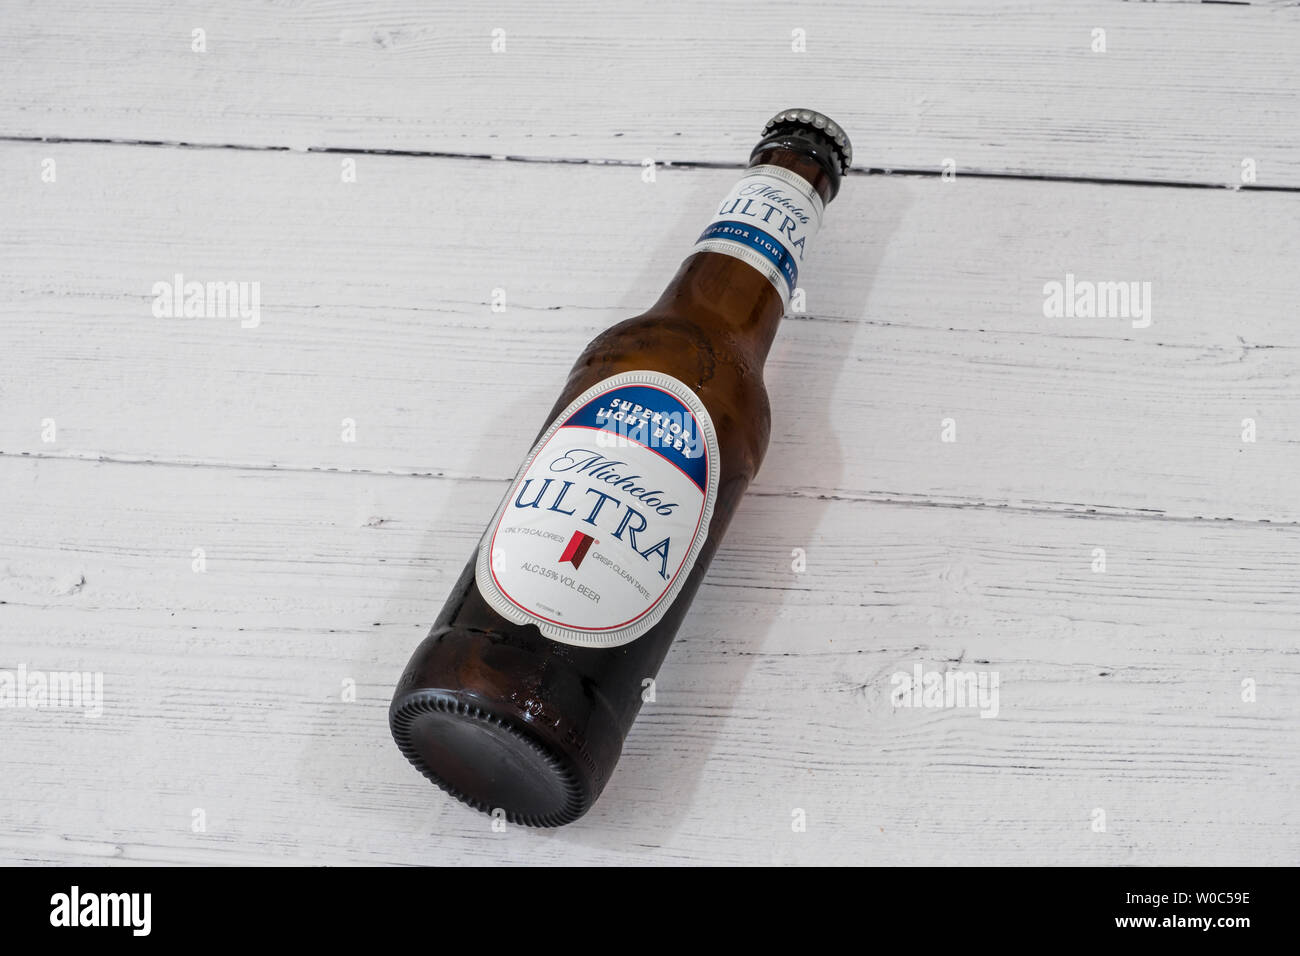 Largs, Scotland, UK - June 20, 2019: A Bottle of Michelob Ultra branded Lager Beer in recyclable glass bottle in line with current UK initiatives Stock Photo